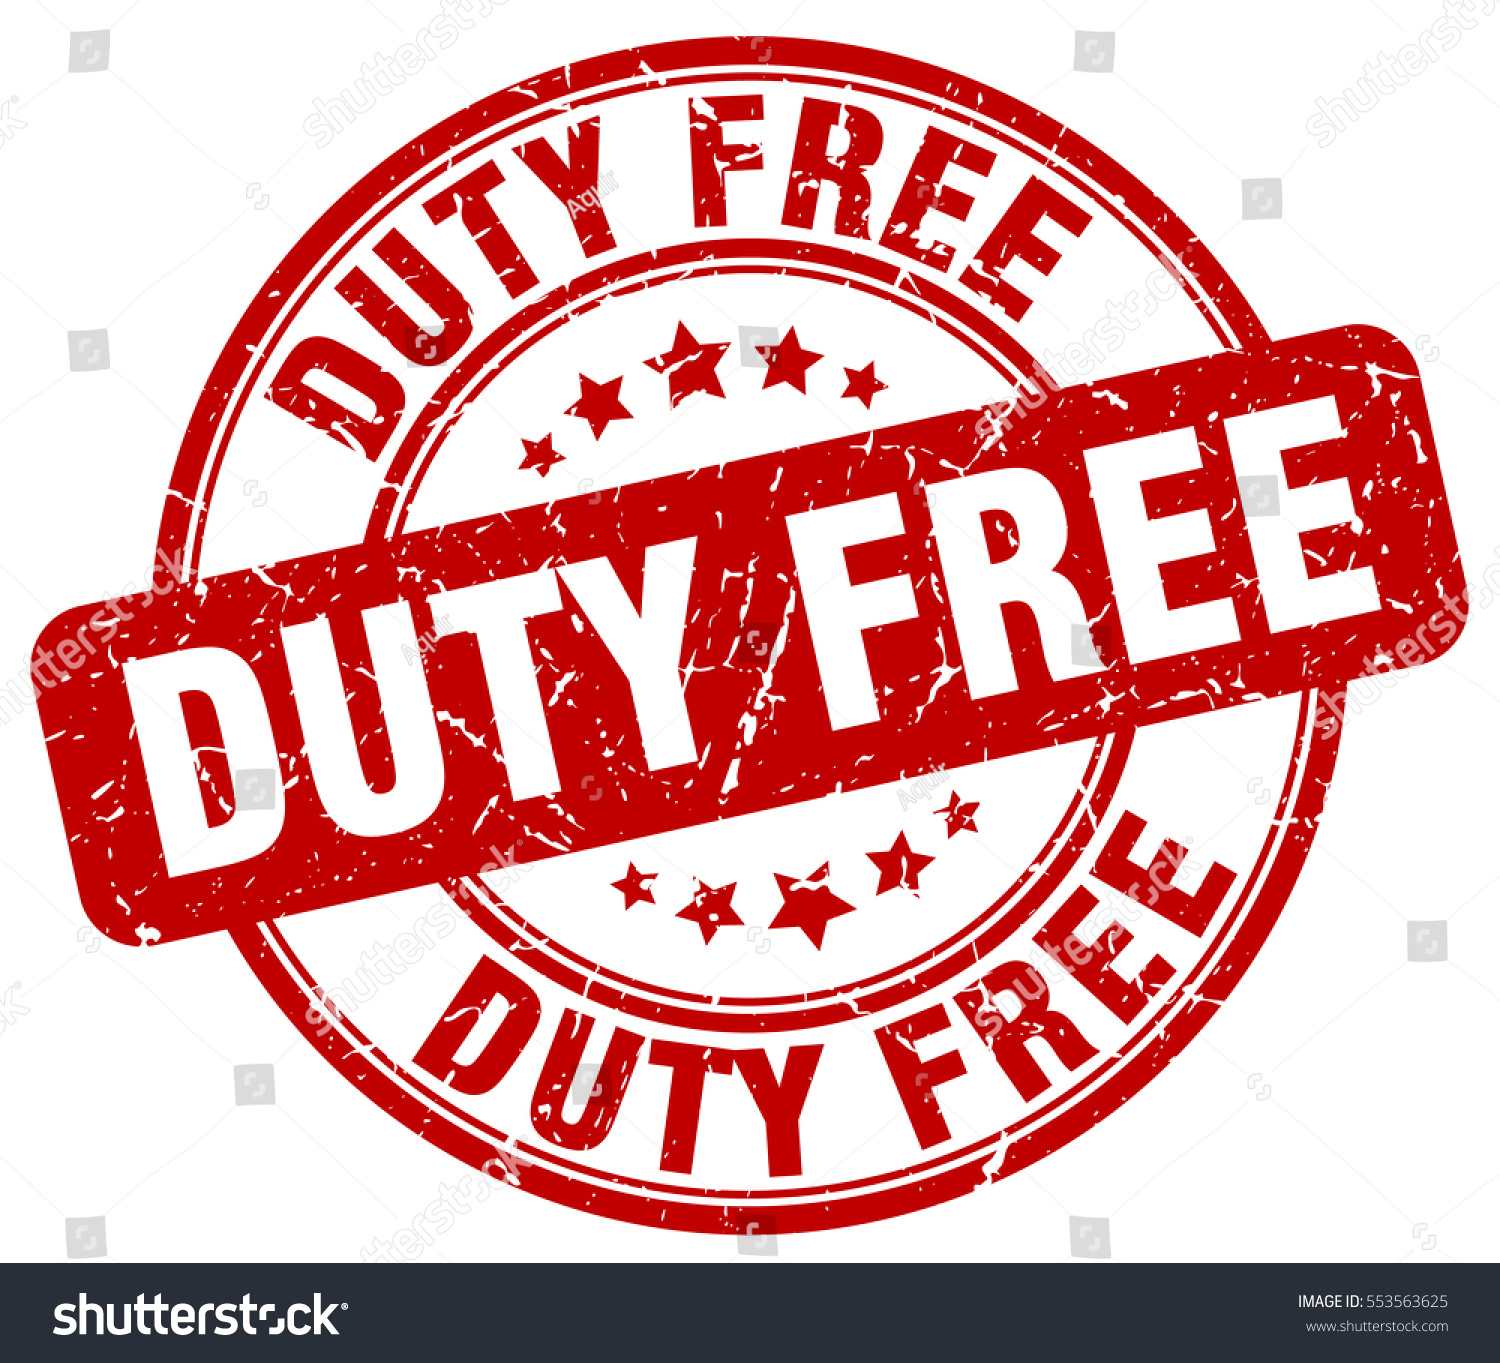 Duty Free Stamp Red Round Grunge Stock Vector HD (Royalty Free ...